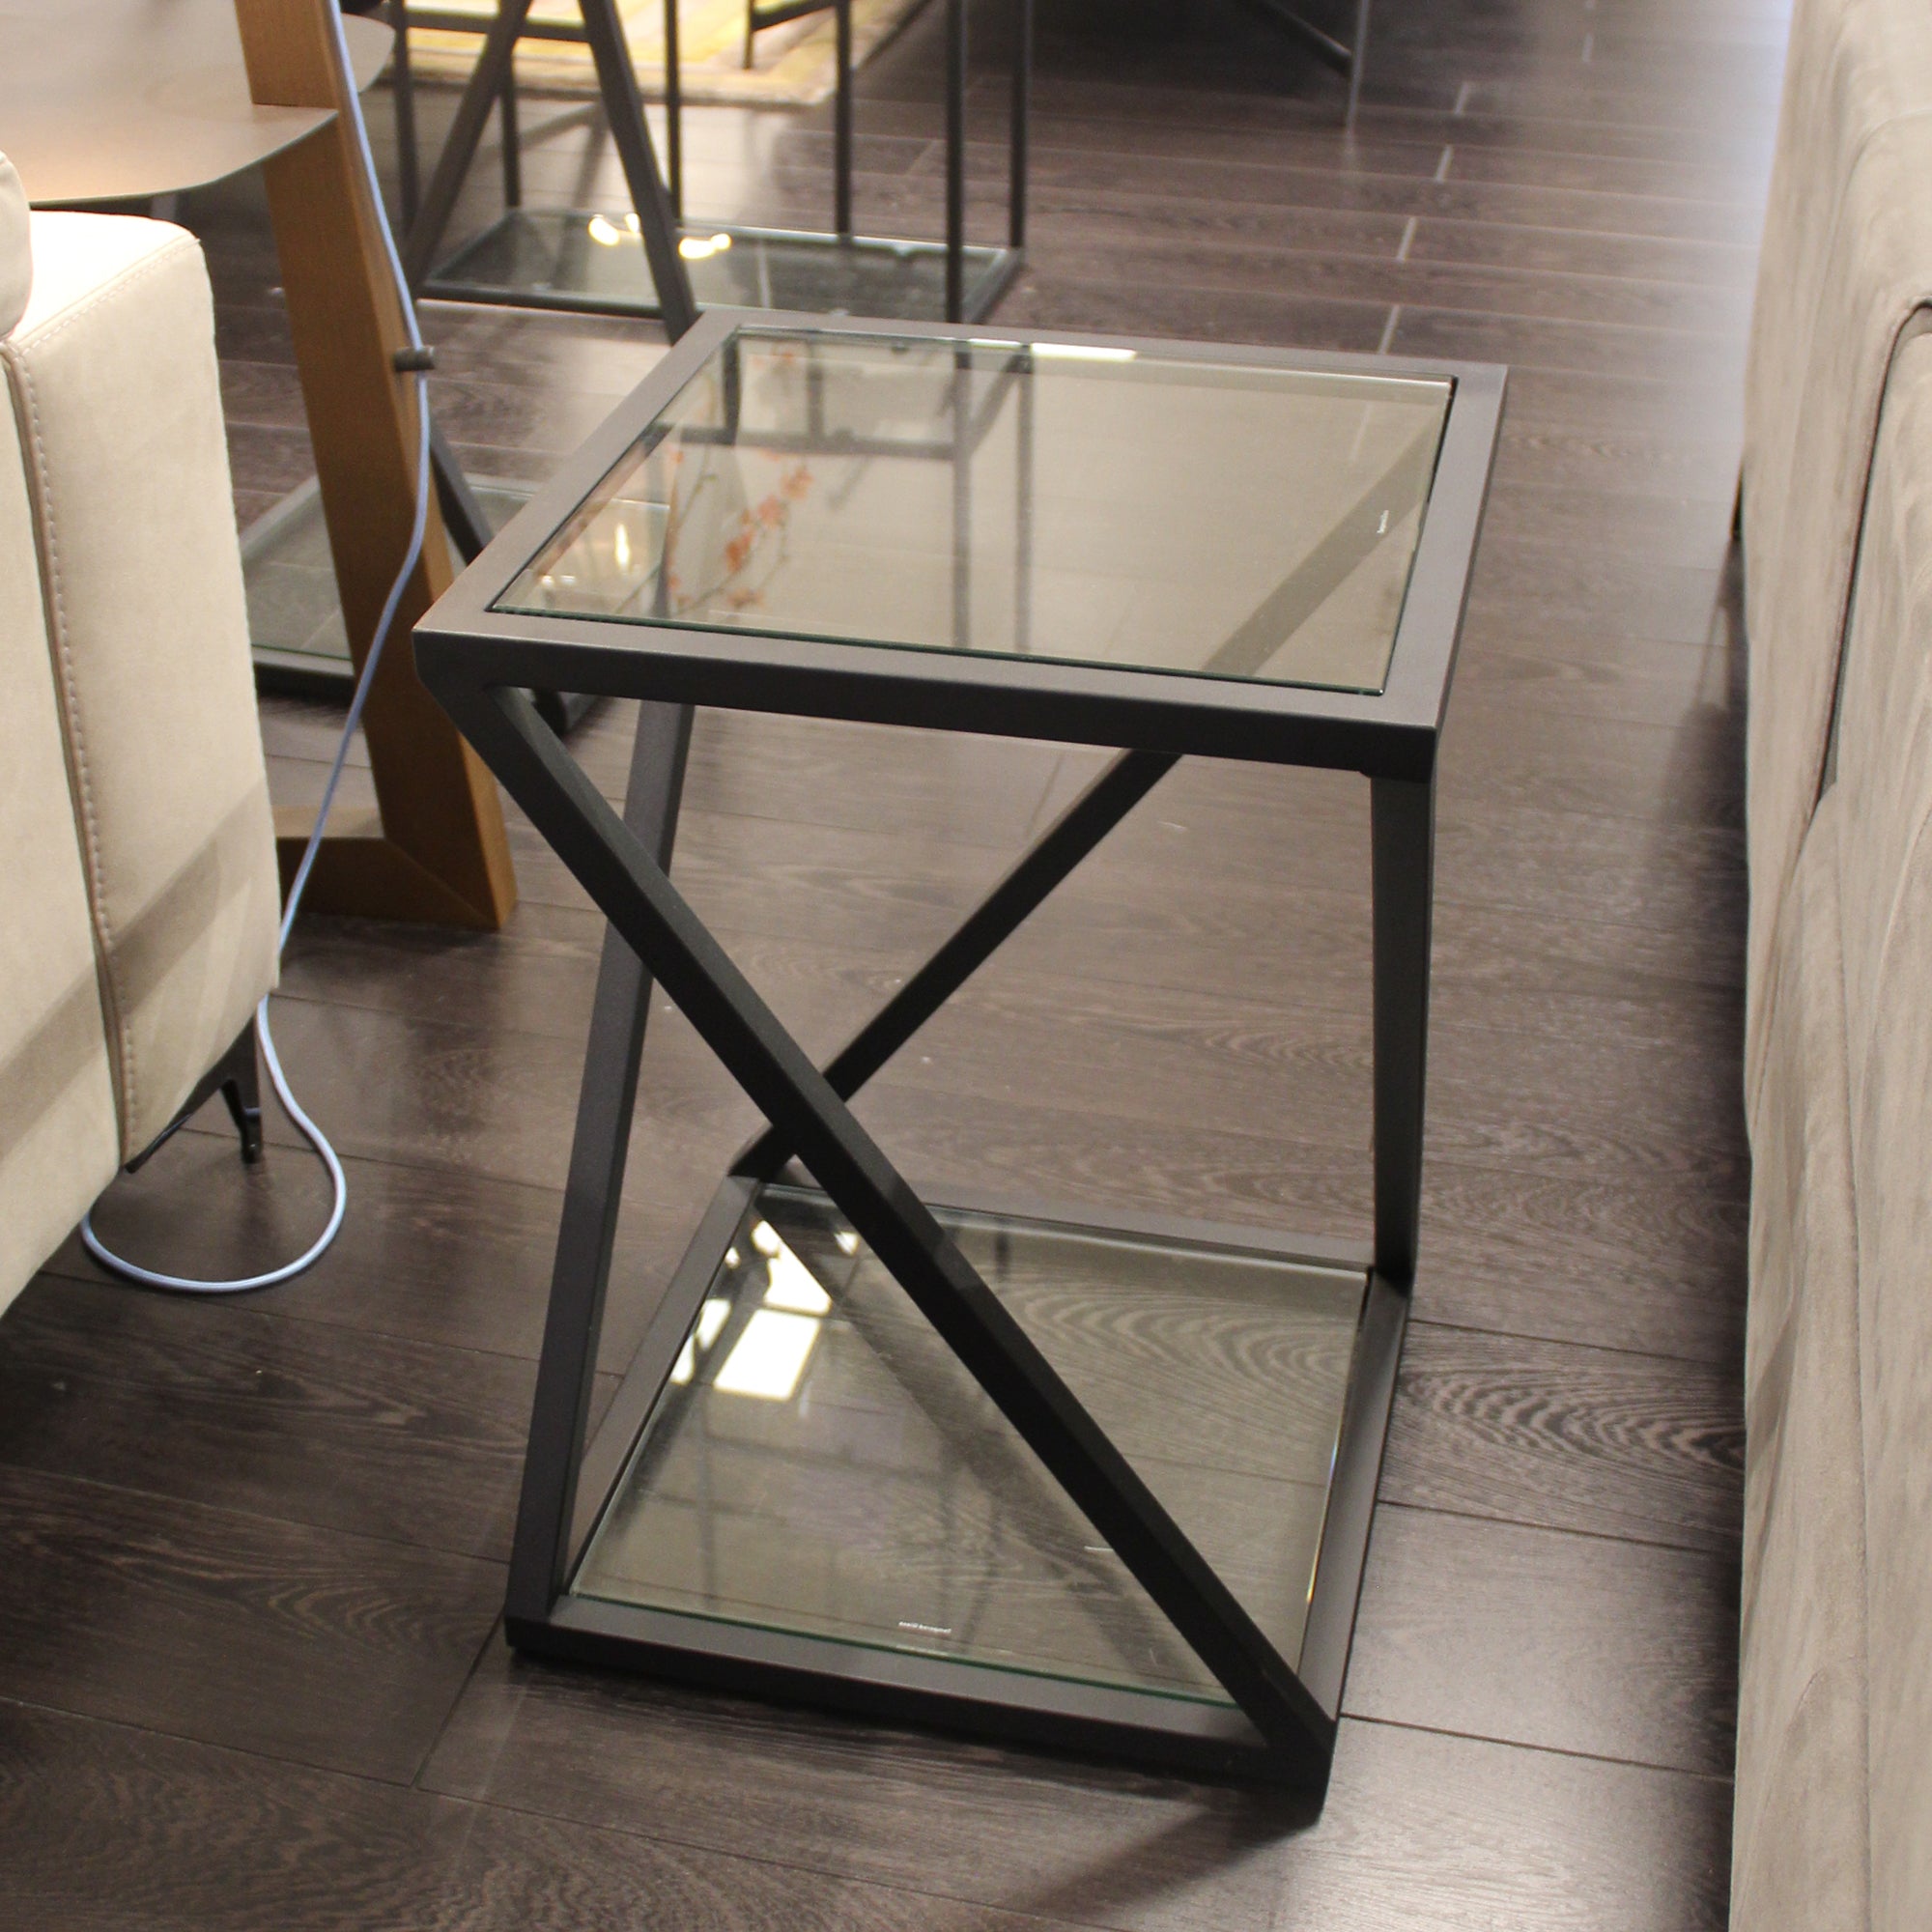 40x55cm X Frame End Table With Clear Glass Top & Black Steel Frame